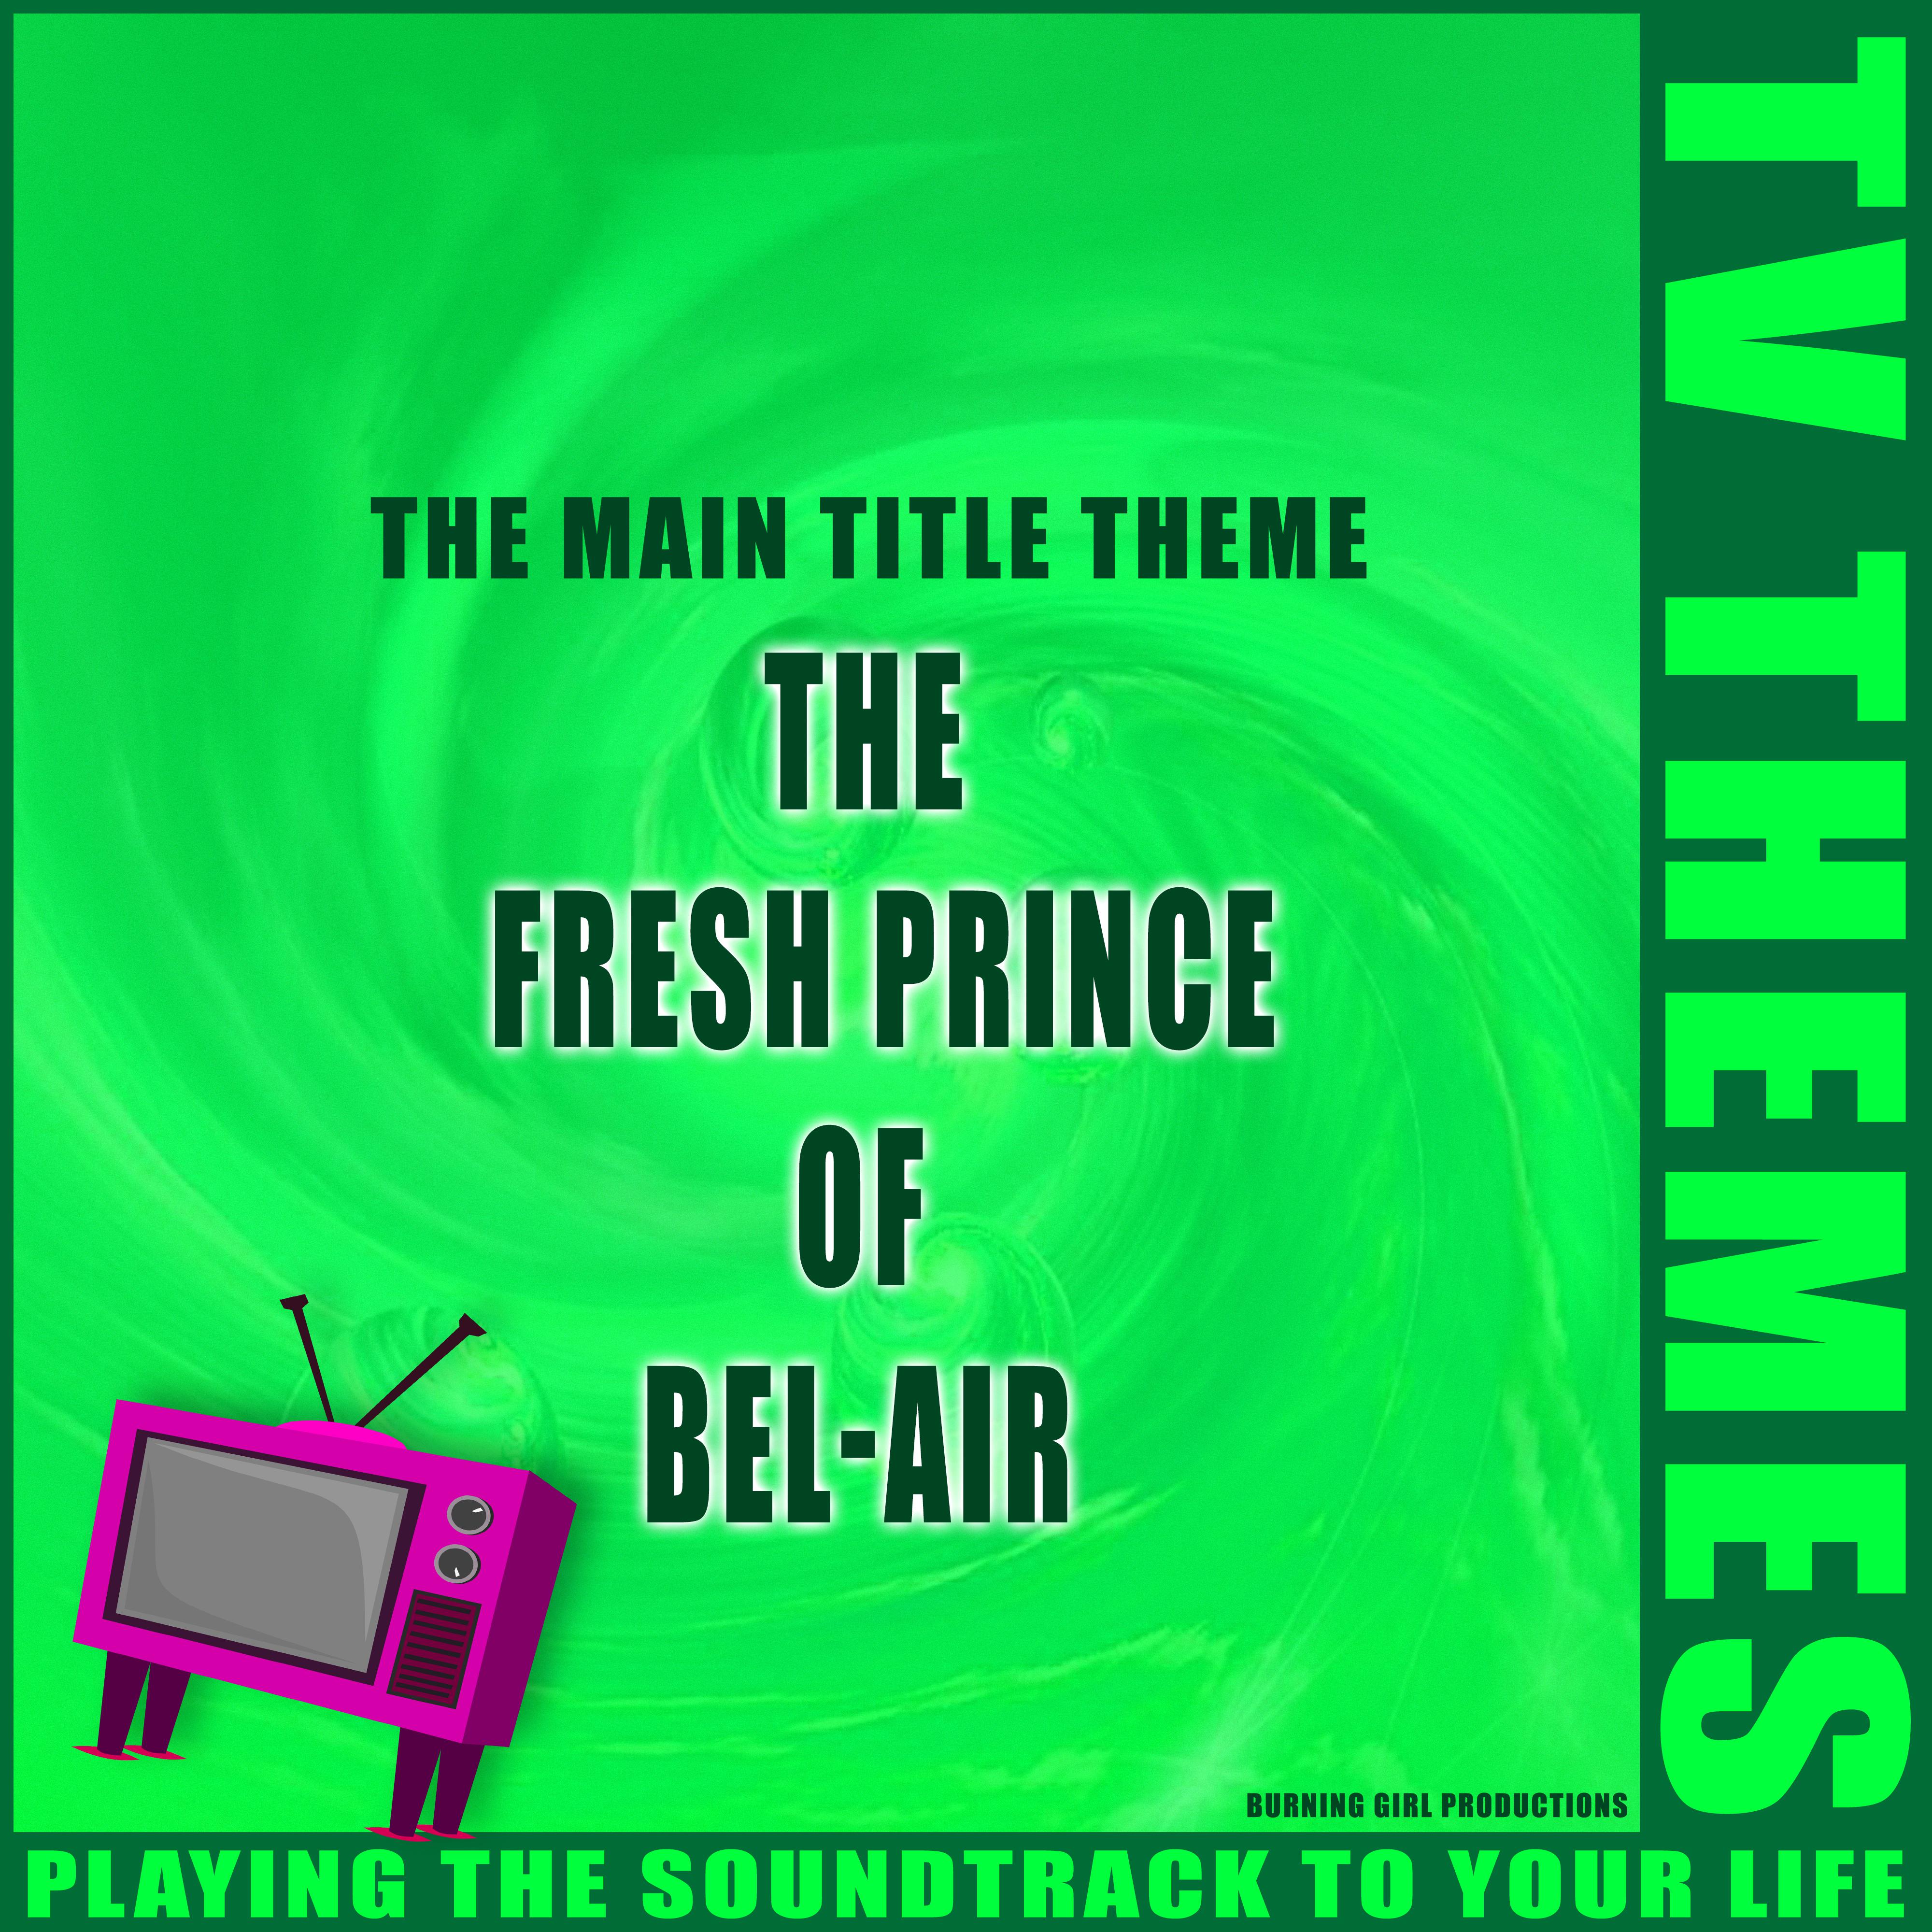 The Main Title Theme - The Fresh Prince of Bel-Air